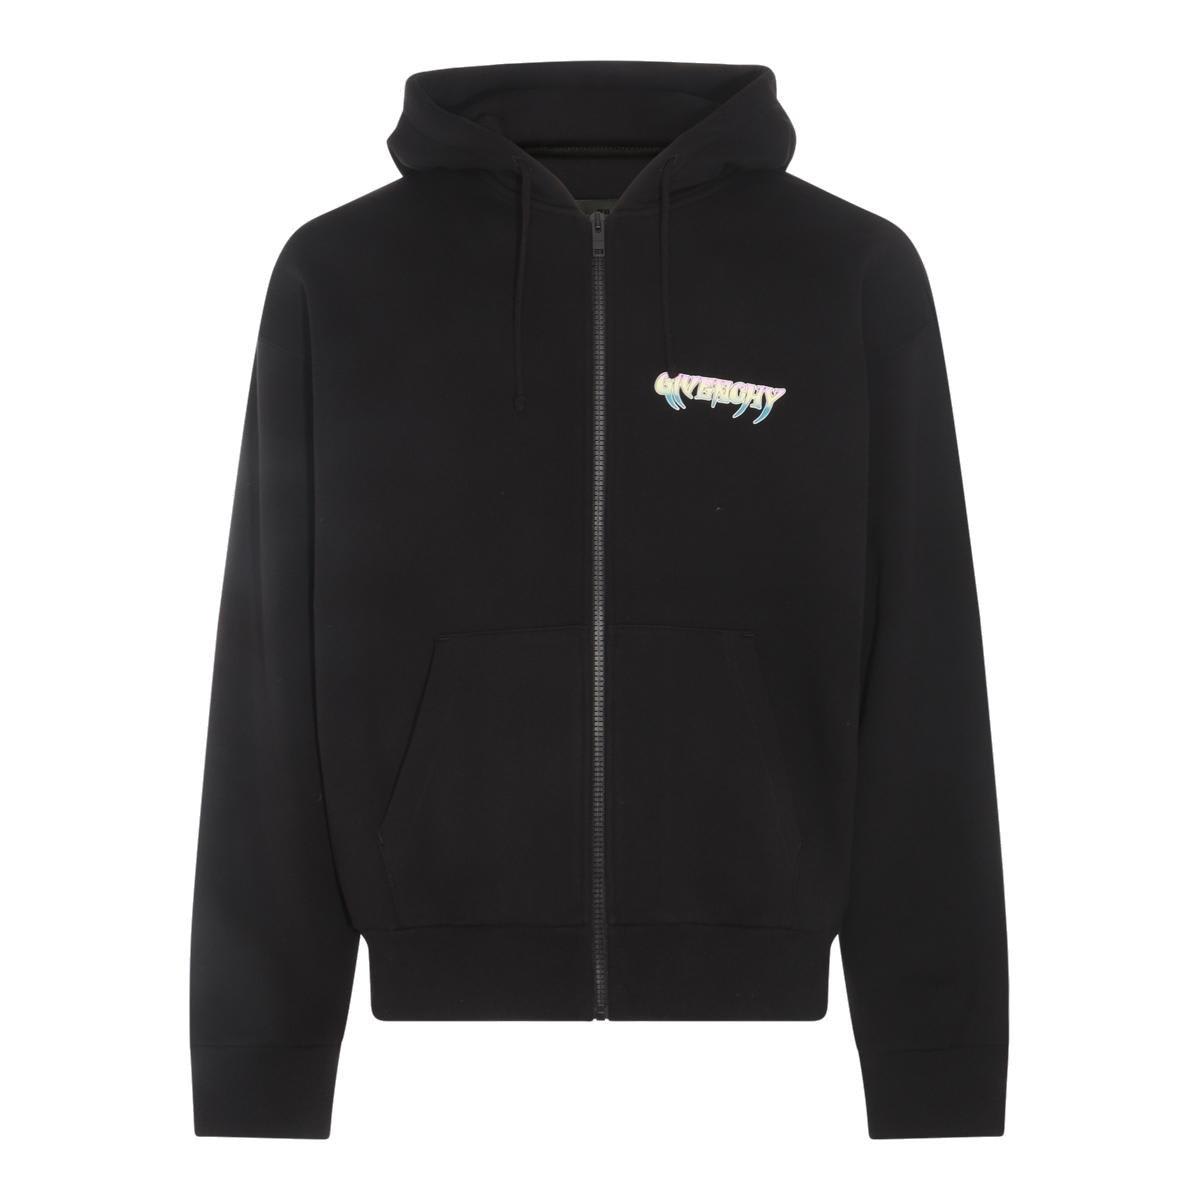 GIVENCHY GRAPHIC PRINTED ZIPPED HOODIE